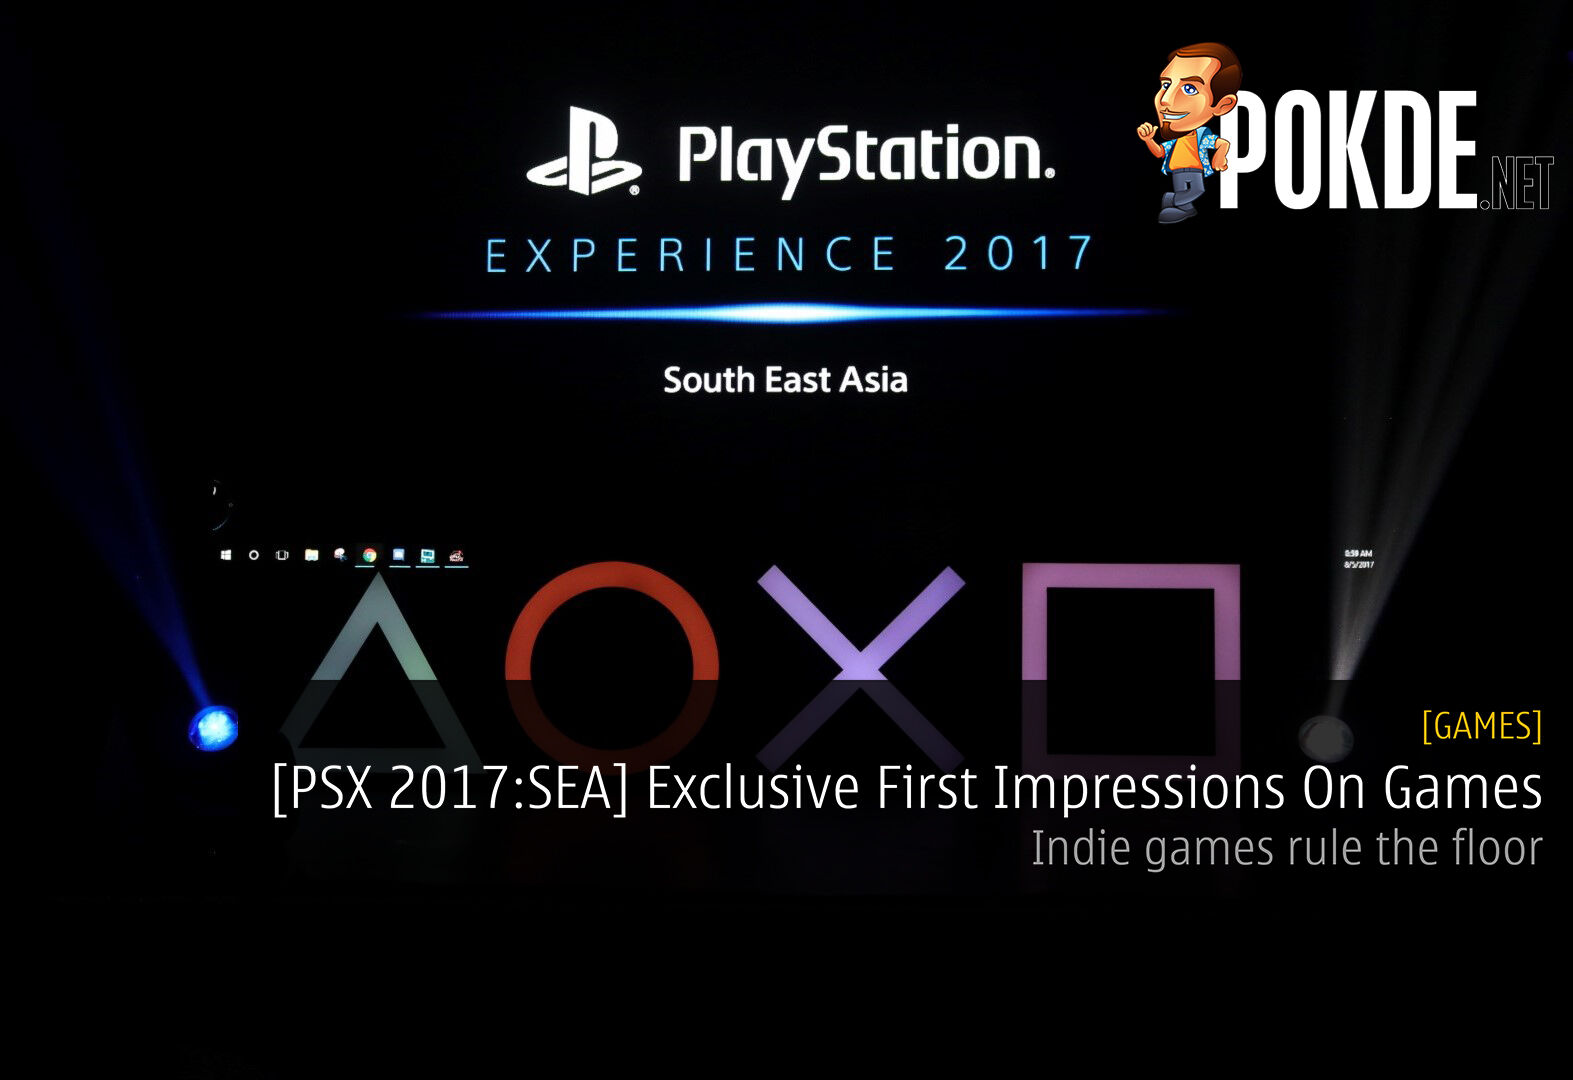 [PSX 2017:SEA] Exclusive First Impressions On Games Showcased at PlayStation Experience 2017: South East Asia - Indie games rule the floor 31